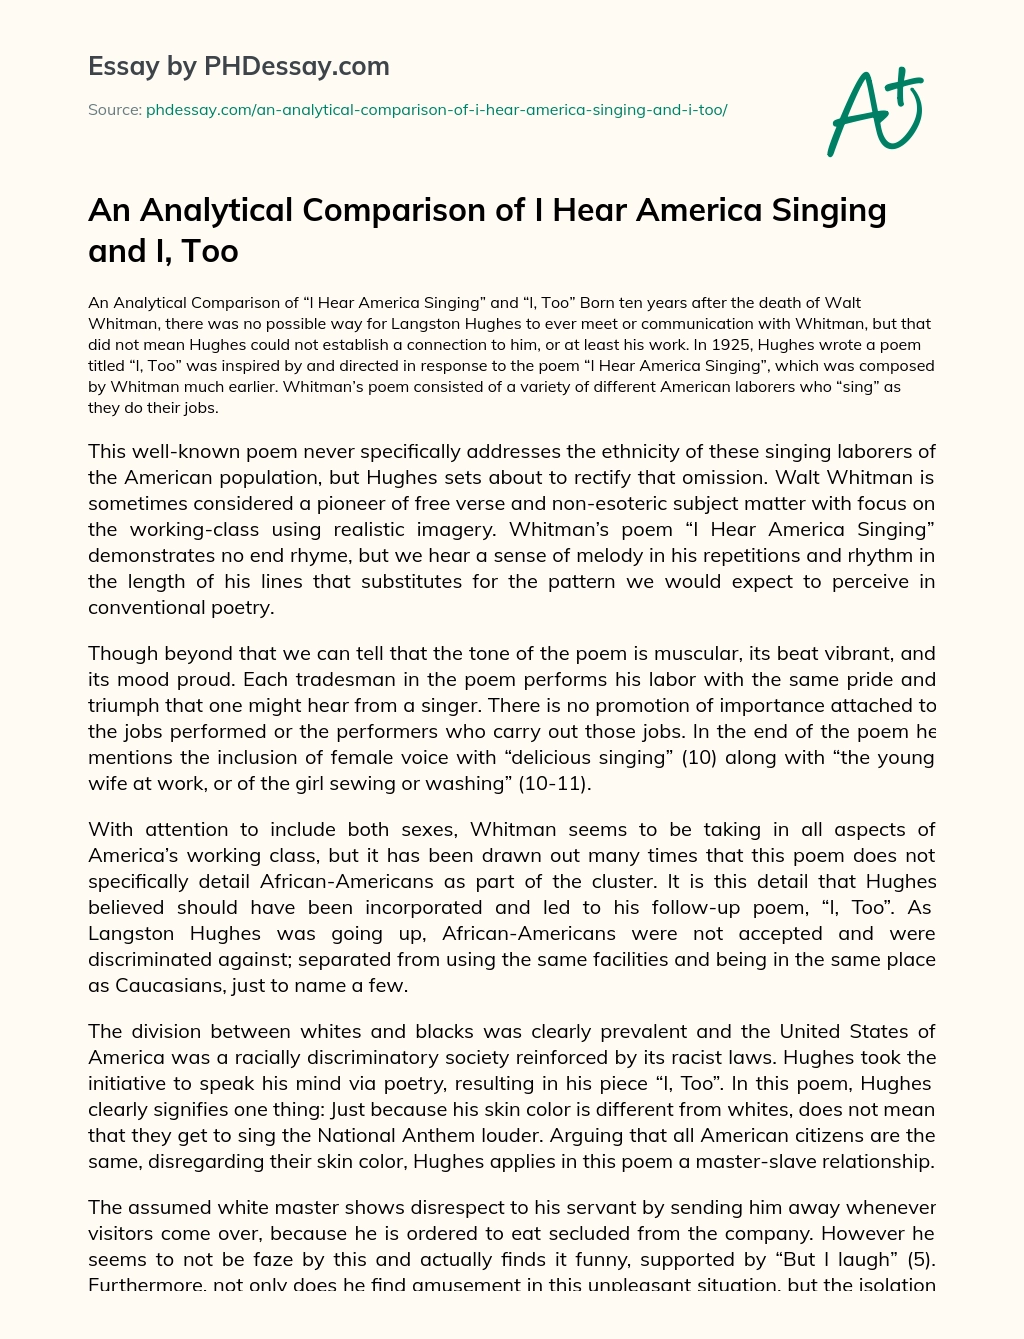 An Analytical Comparison of I Hear America Singing and I, Too essay